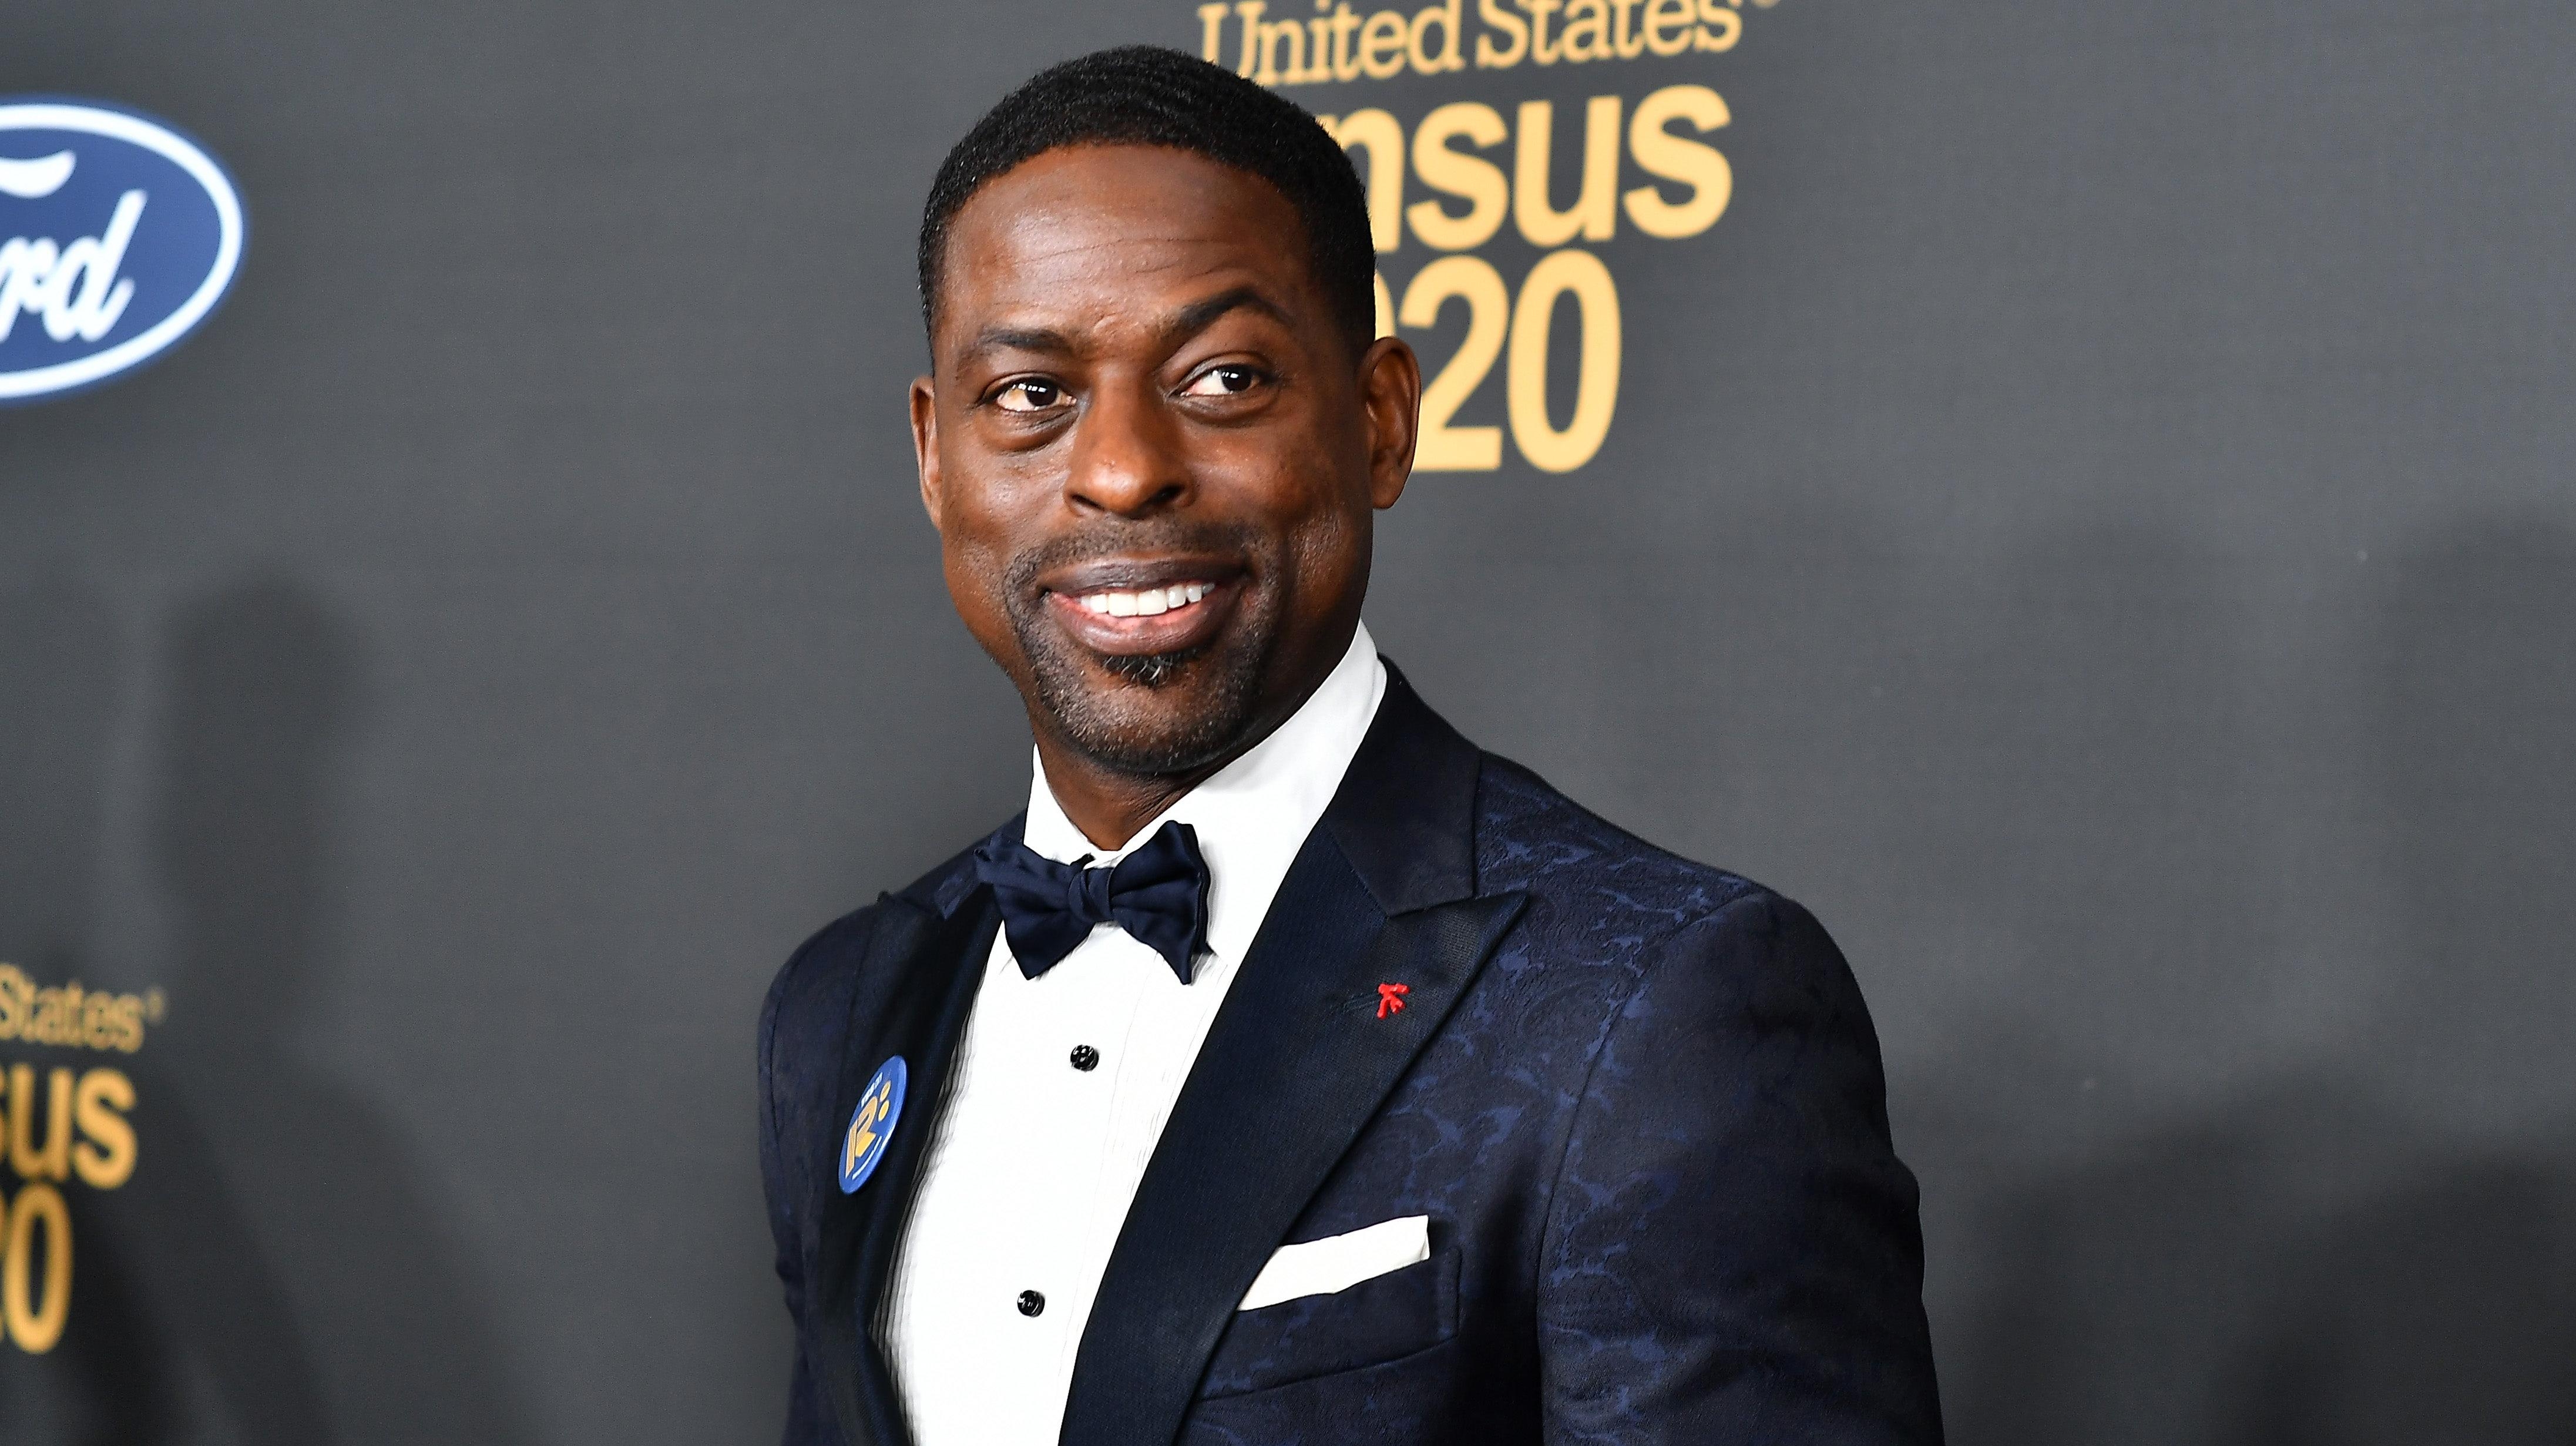 This Is Us star Sterling K. Brown to lead Hulu’s miniseries adaptation of Washington Black